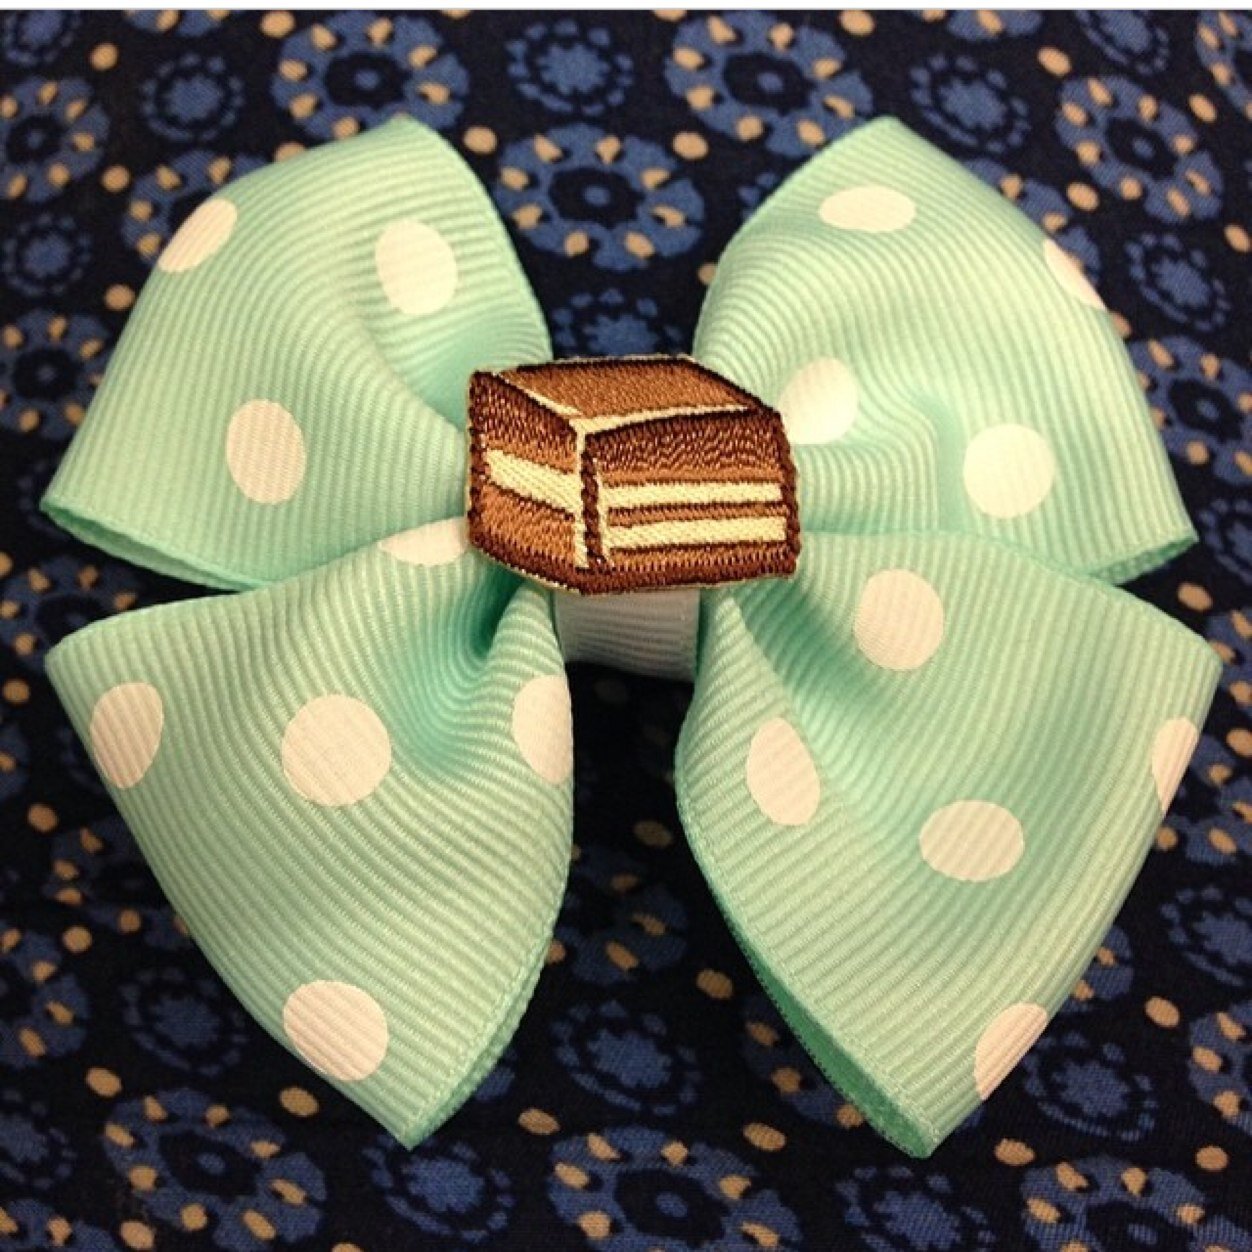 tailormade bows, headbands, and dog bows.